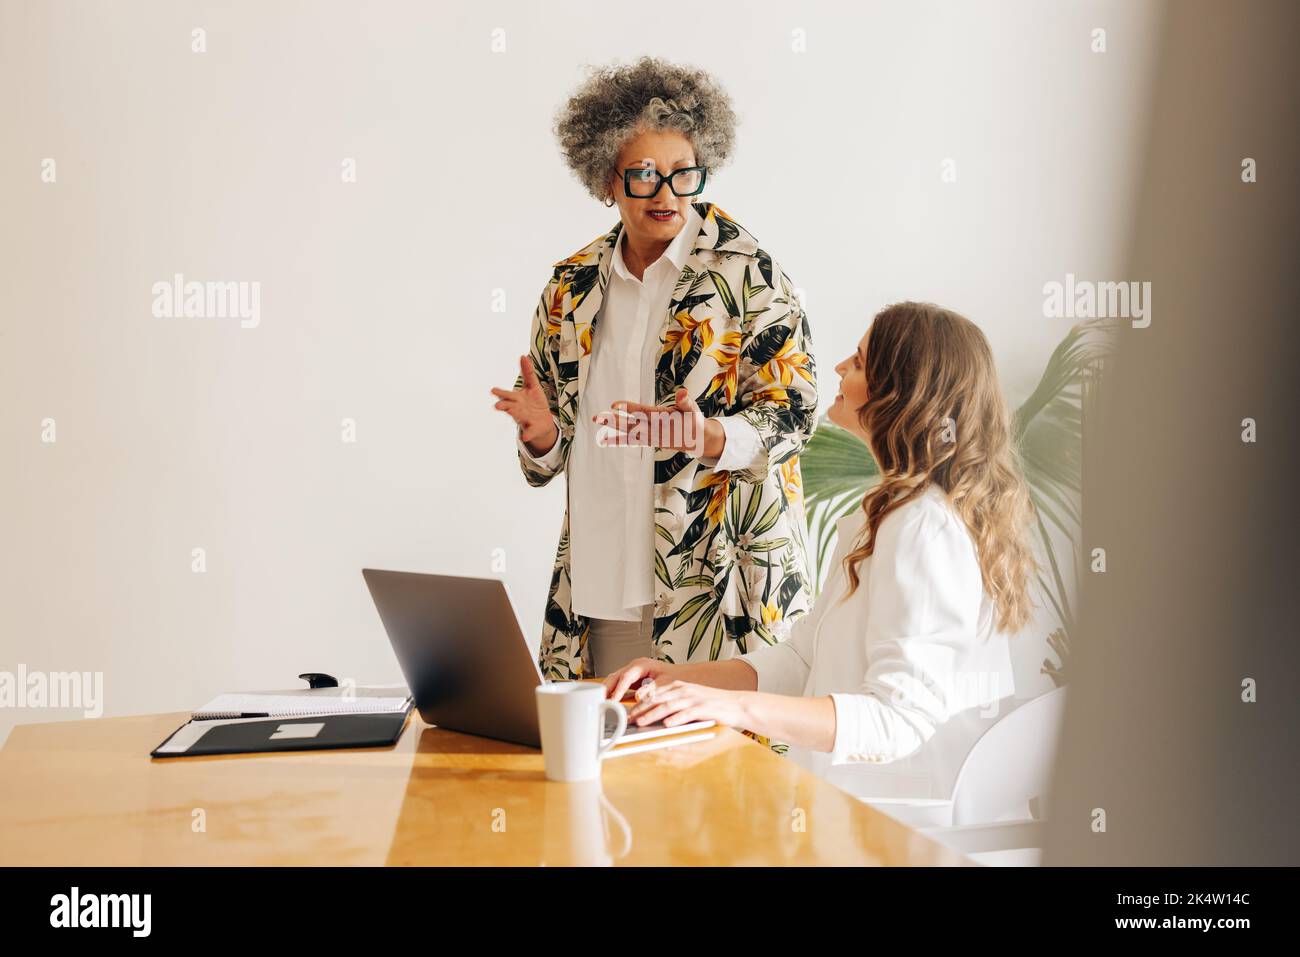 Two diverse businesswomen having a discussion in a modern meeting room. Creative businesswomen collaborating on a new task in a woman-owned startup. Stock Photo